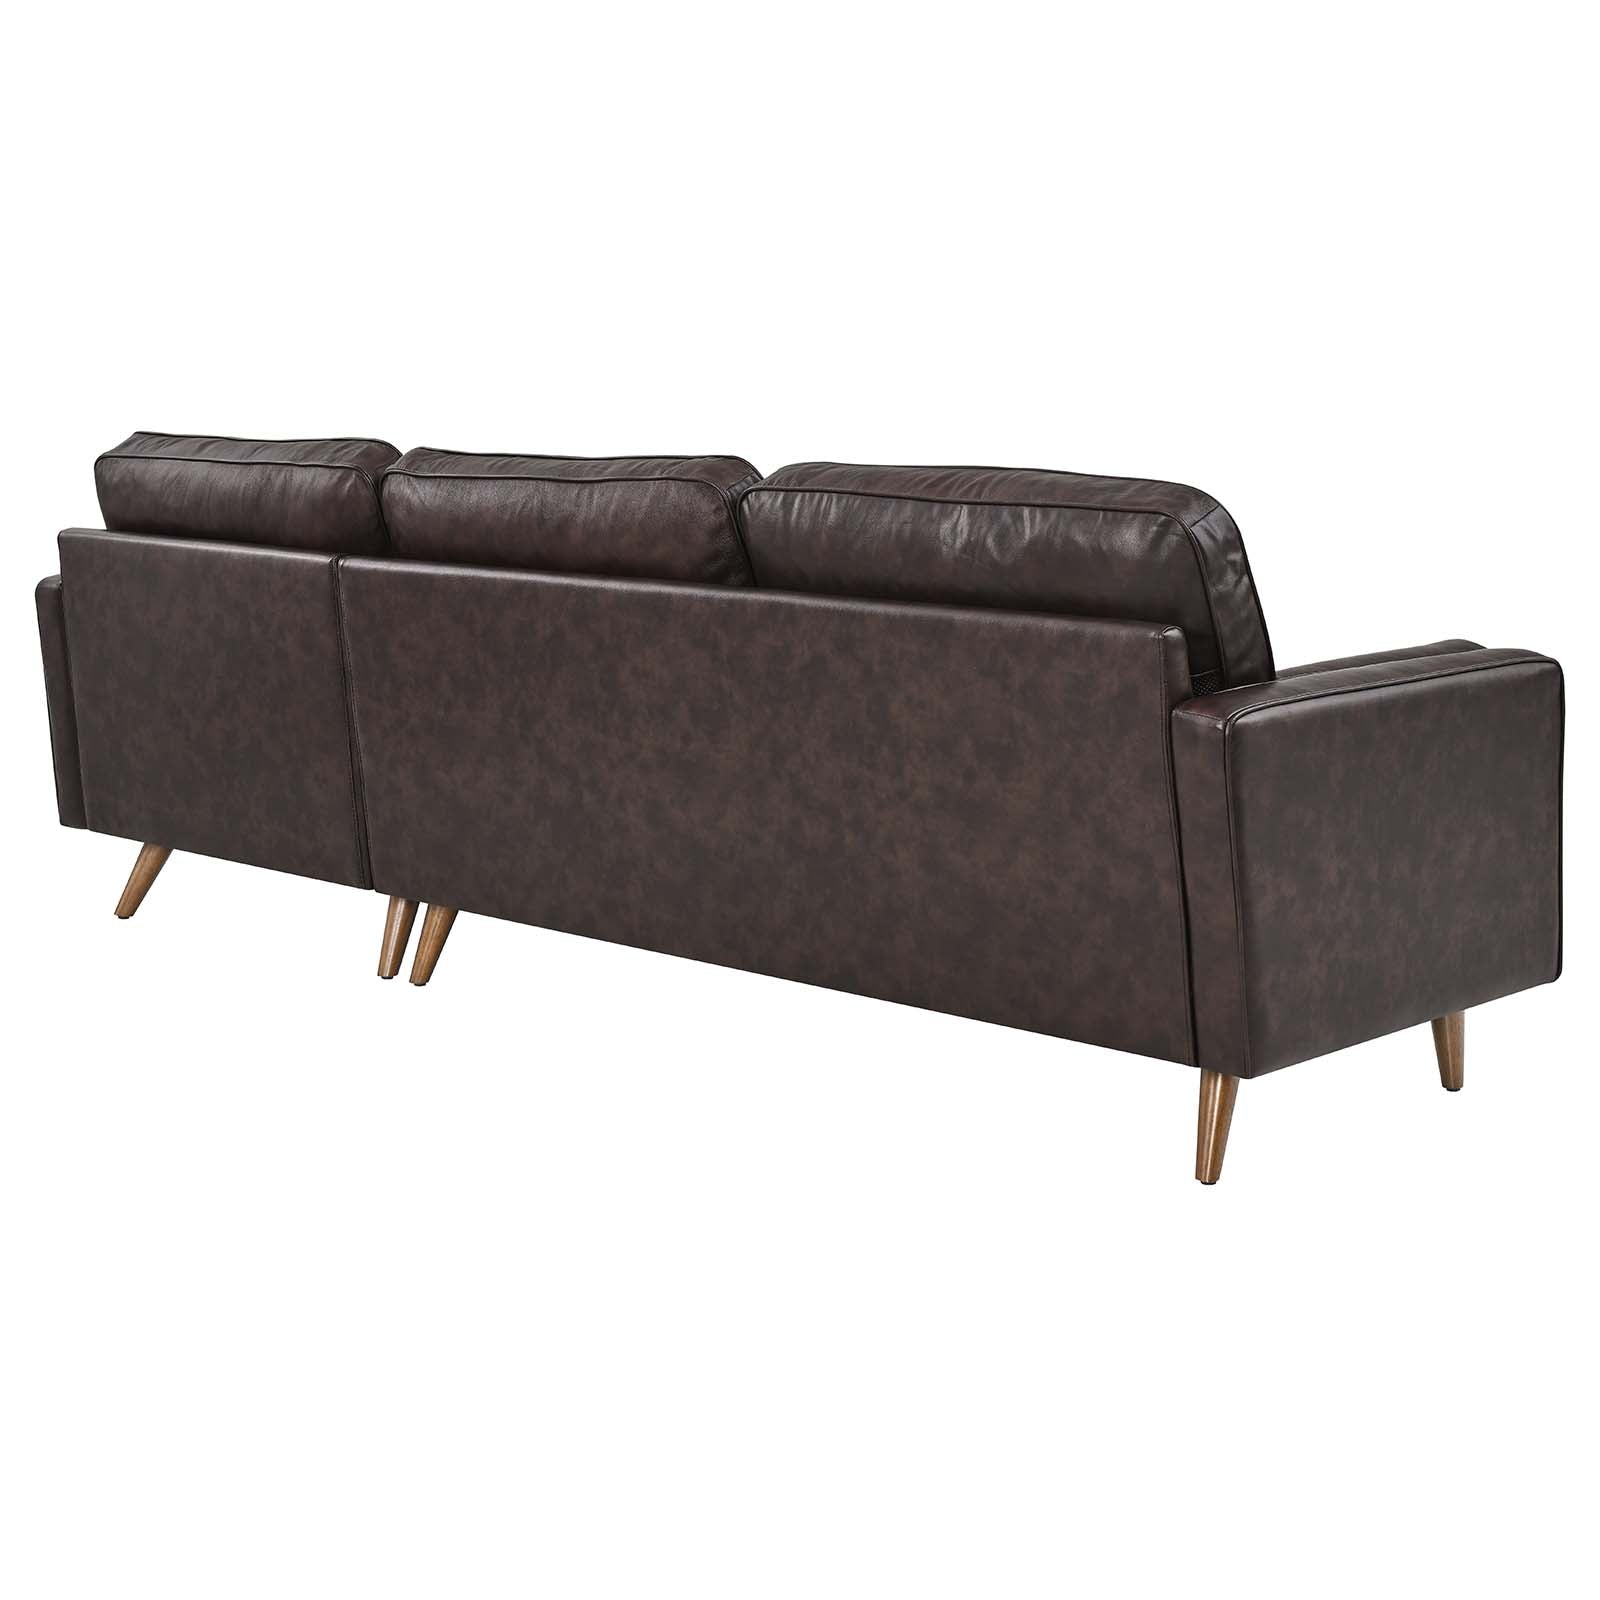 Valour 98" Leather Sectional Sofa - East Shore Modern Home Furnishings